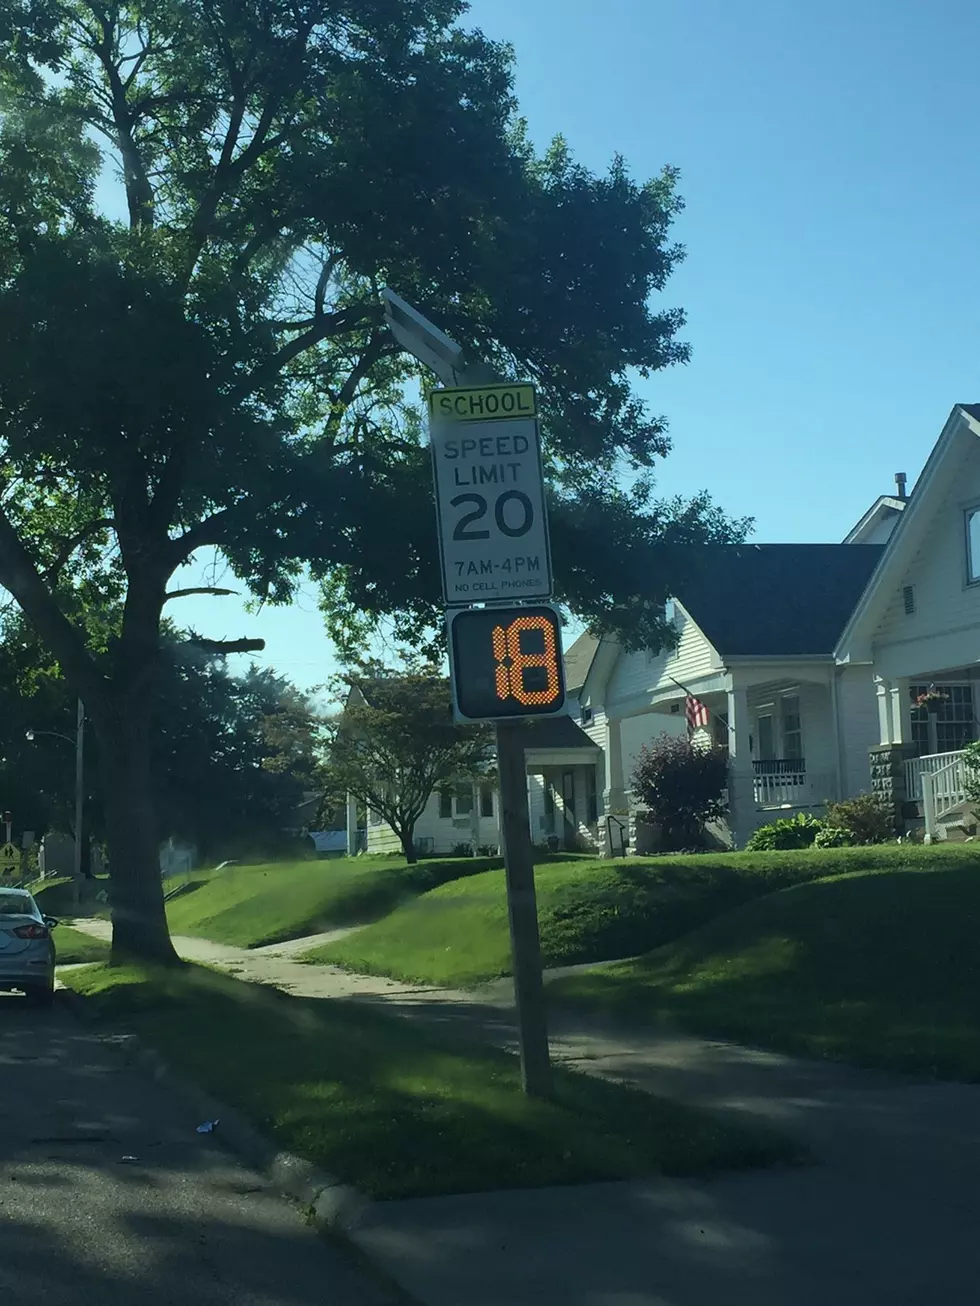 School Zone Rules for The Summer